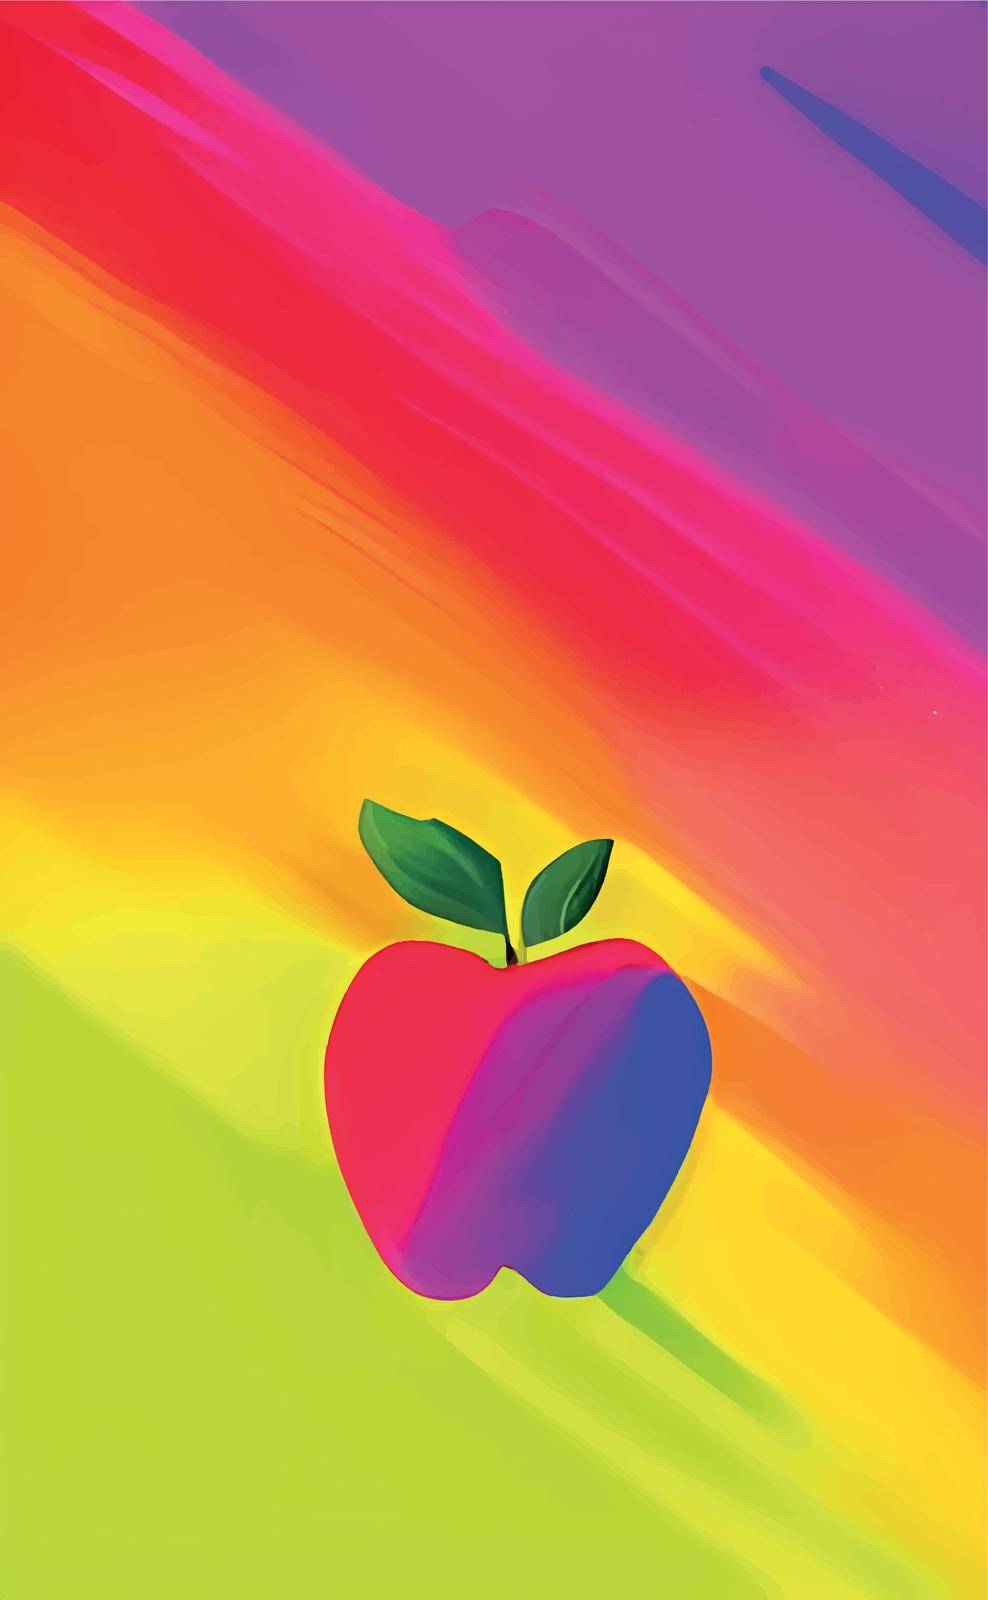 colorful background with colorful apple by yilmazsavaskandag